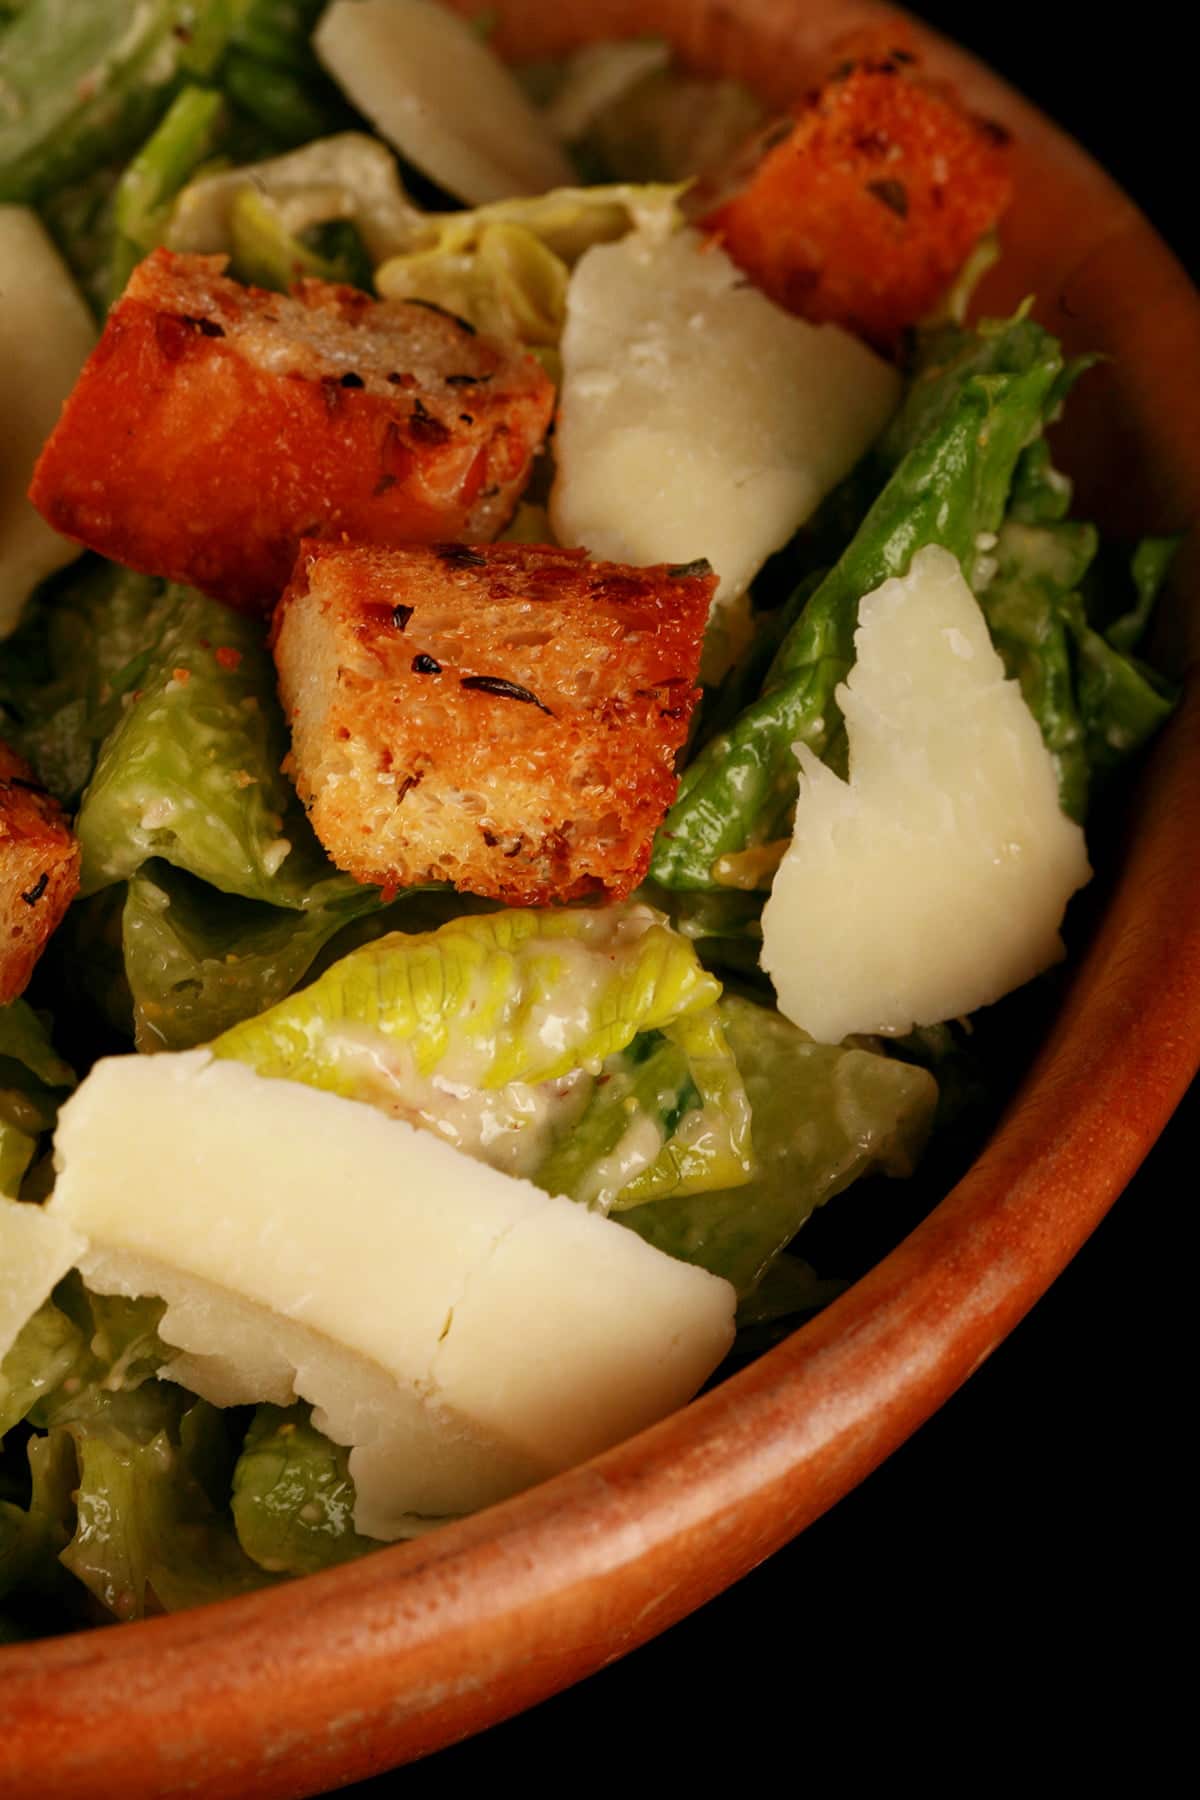 A bowl of "extreme" caesar salad, with big flakes of Parmesan cheese, and croutons.